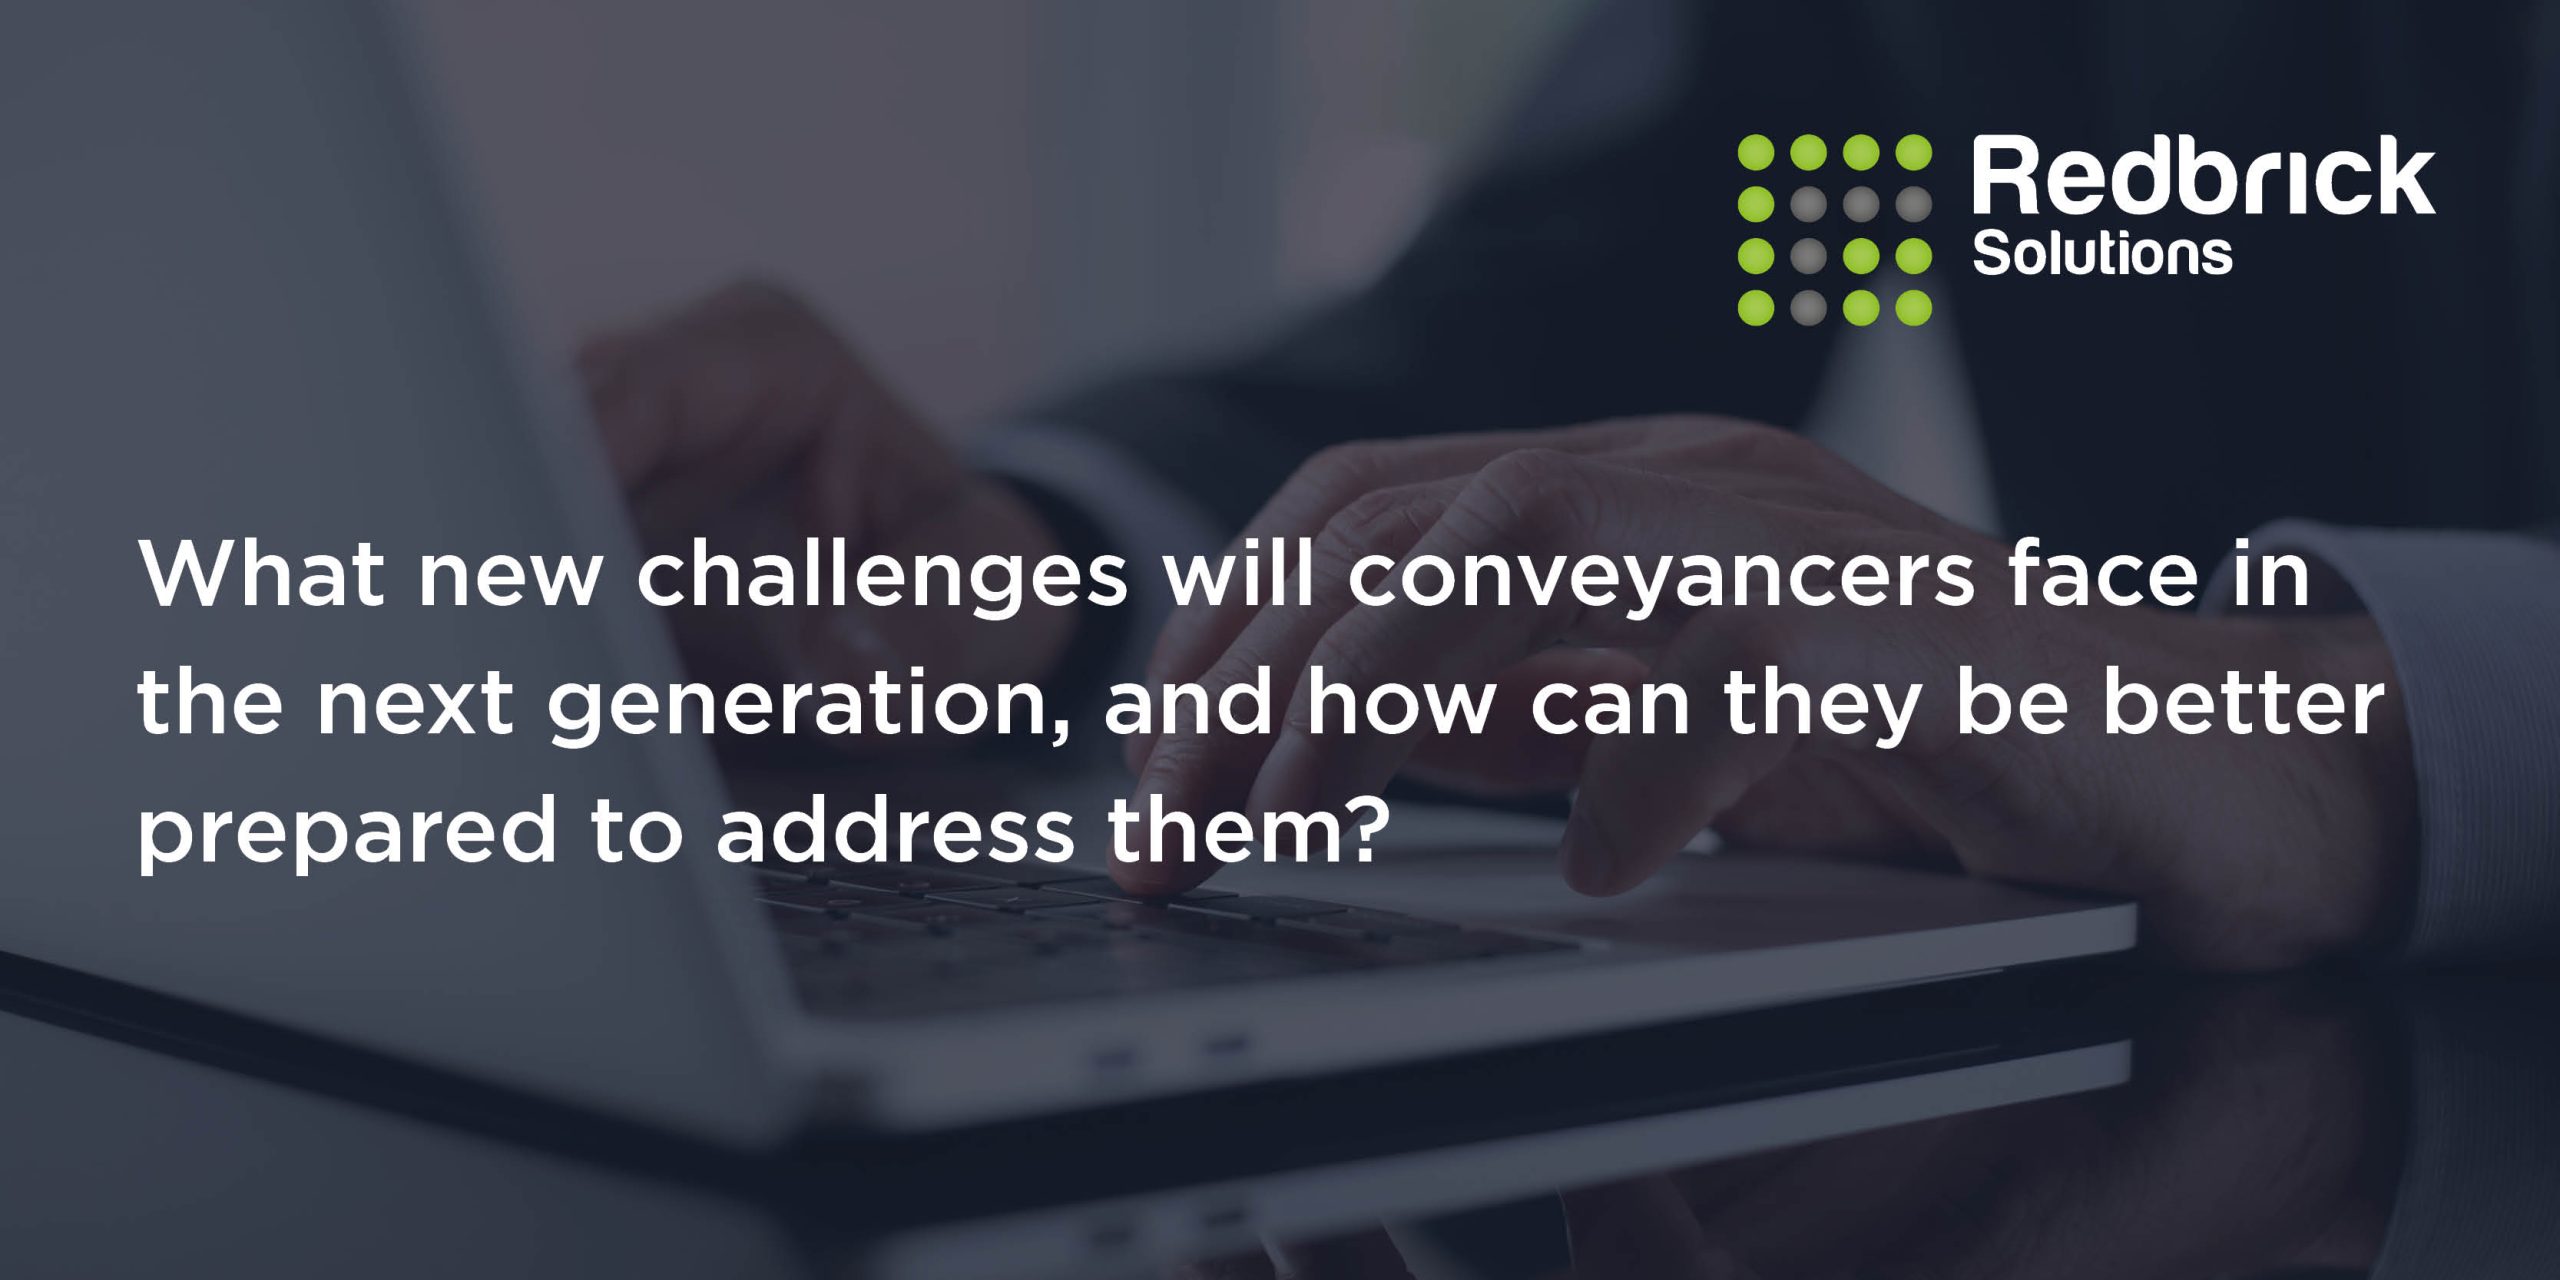 What new challenges will conveyancers face in the next generation, and how can they be better prepared to address them?